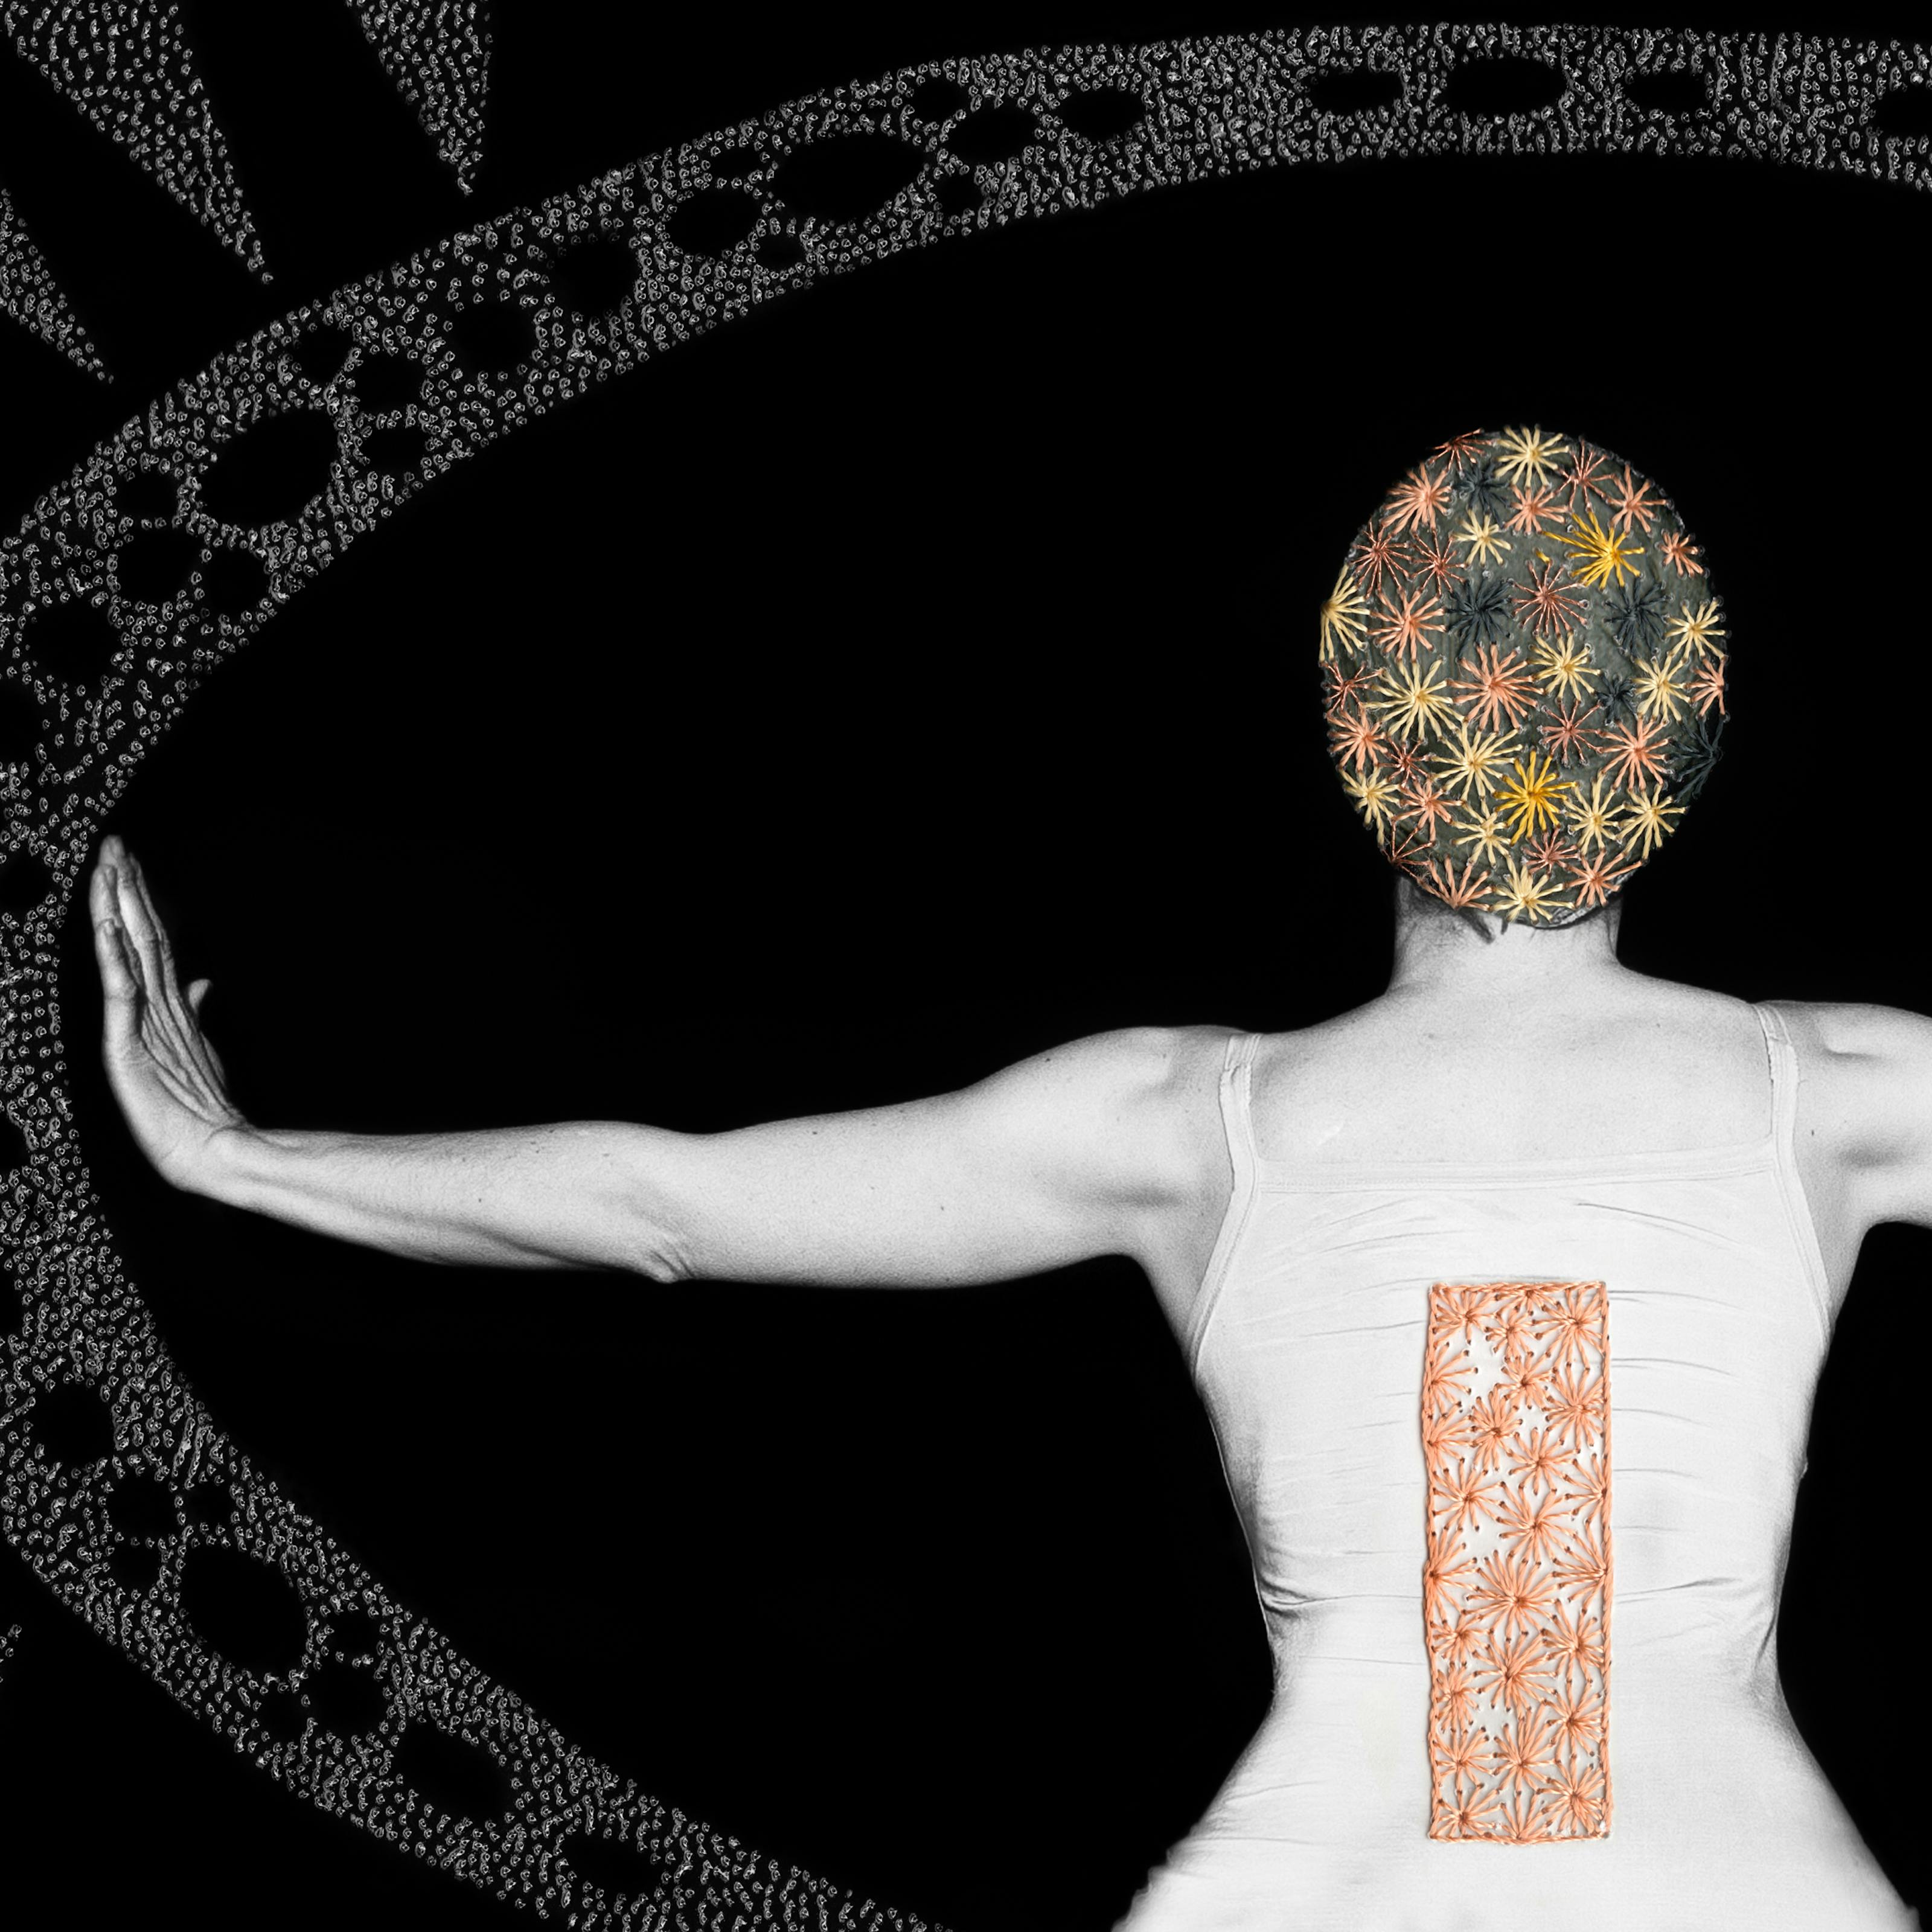 Artwork made up of a black and white photograph of a female figure from behind, from the waist up, against a black background. Her arms are held out straight to either side, her wrists and hands held up indicating a stop action. Embroidered into the photographic print with yellow and orange coloured thread is a crisscross floral pattern which exactly covers her head and hair. Across her back, embroidered in a copper coloured thread is a large  thin vertical rectangle. Surrounding the figure is a large ellipse made up of a layered texture of dots which forms a protective barrier against sharp tooth like forms approaching the barrier, also made up of layered textured dots.